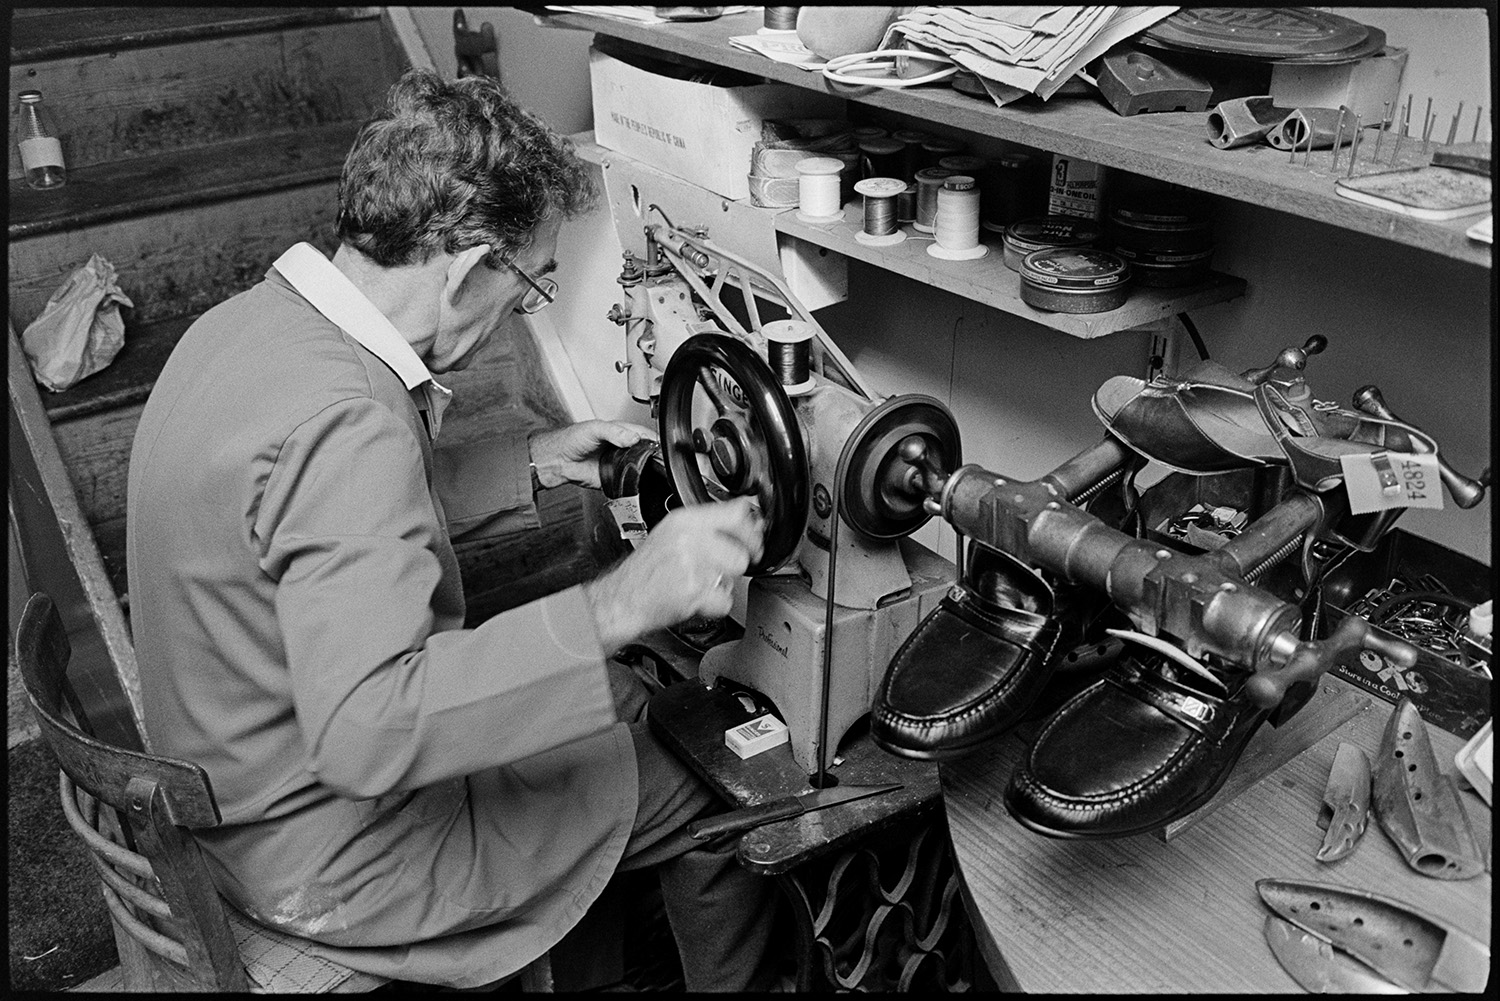 Cobbler mending shoes, interior of workshop, shoe displays. Customers collecting repairs. 
[A man mending shows in his cobbler's workshop in Mill Street, Bideford. He is using a Singer sewing machine.]